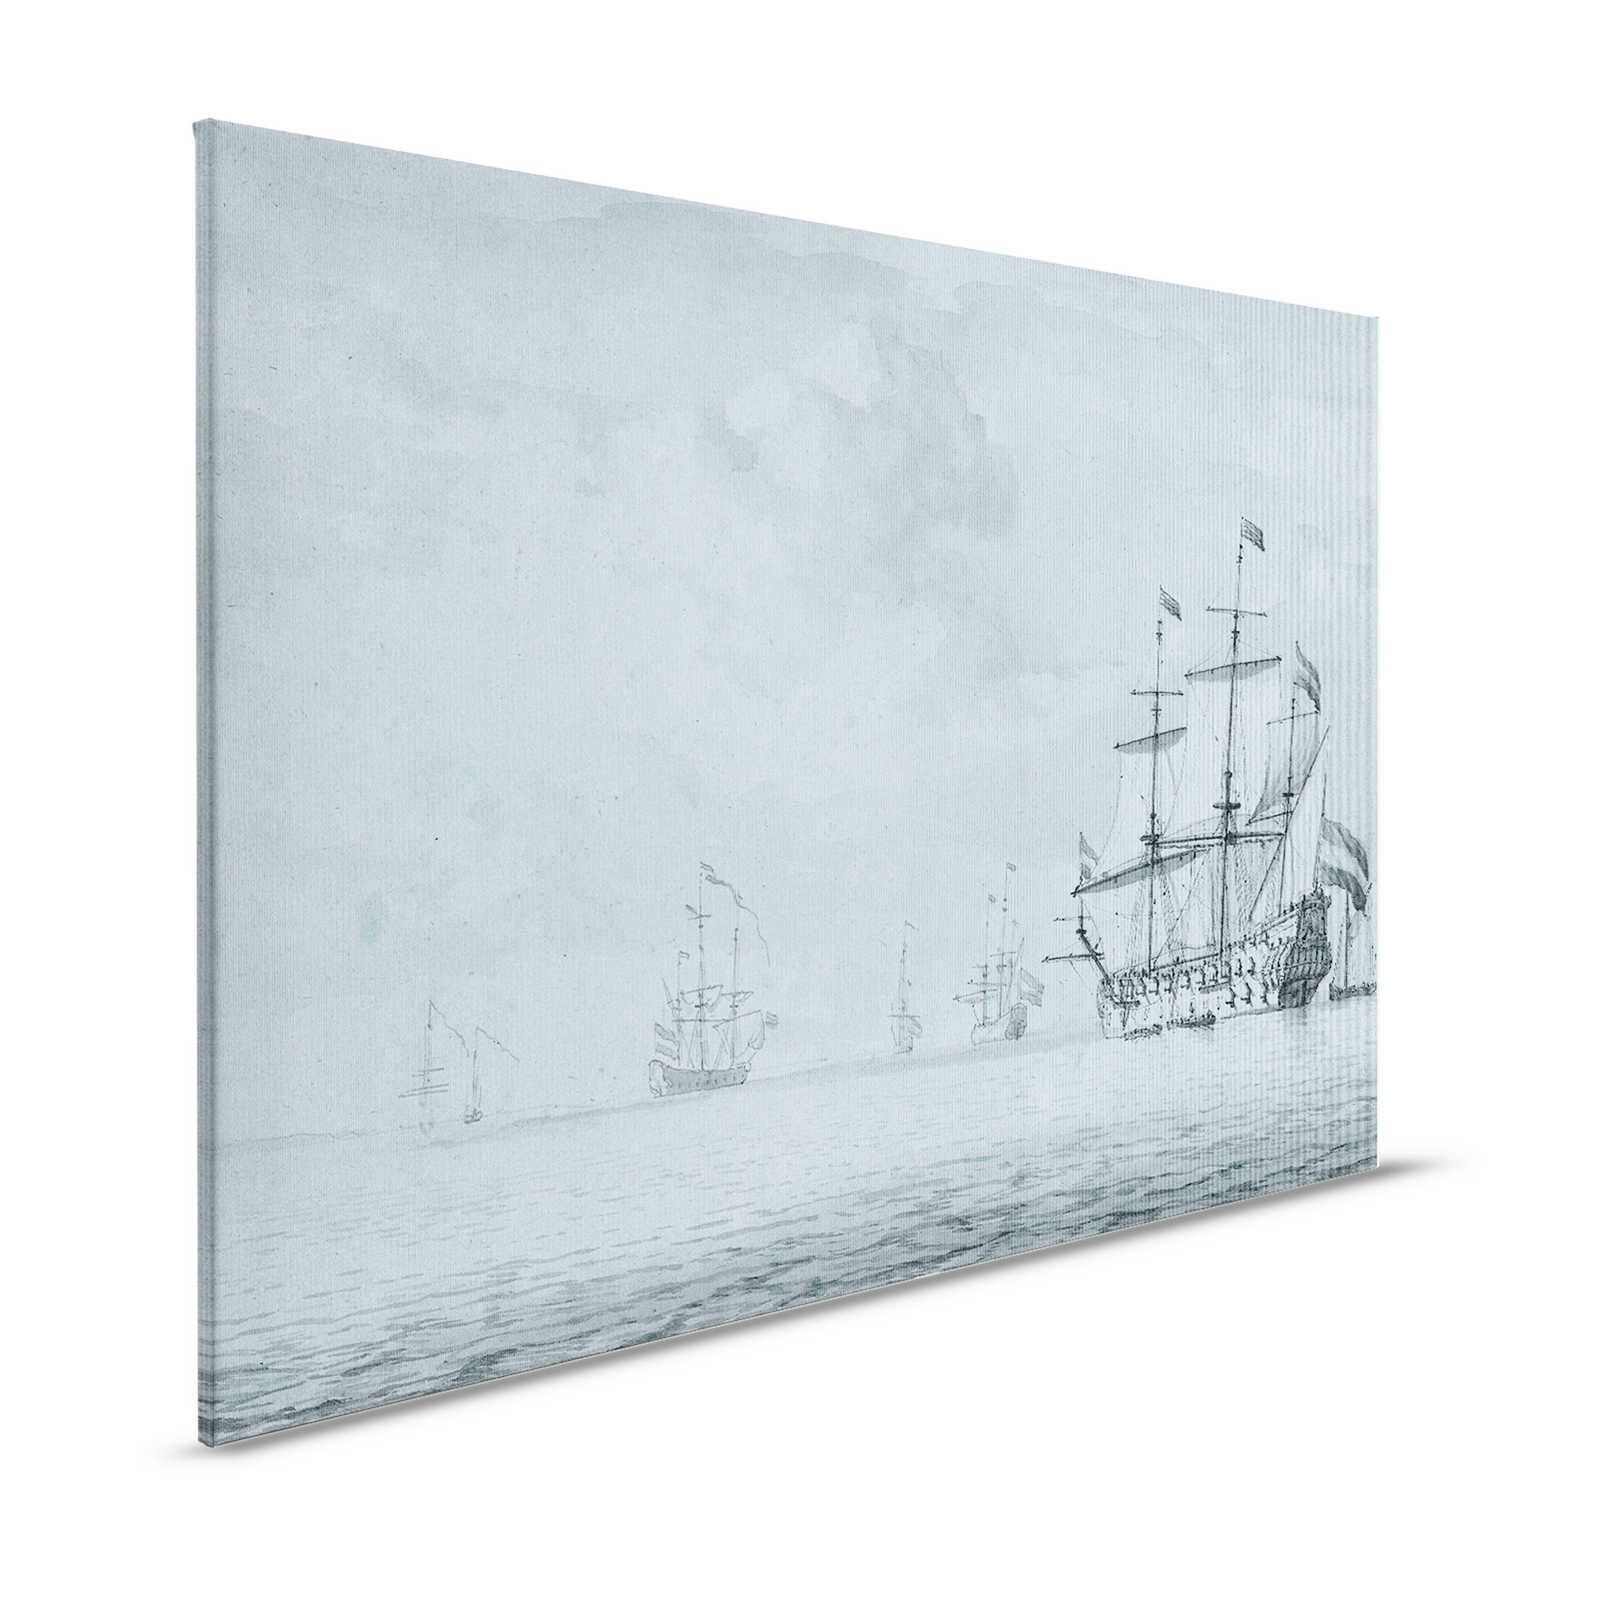 On the Sea 1 - Grey Blue Canvas painting Ships Vintage Painting Style - 1.20 m x 0.80 m
